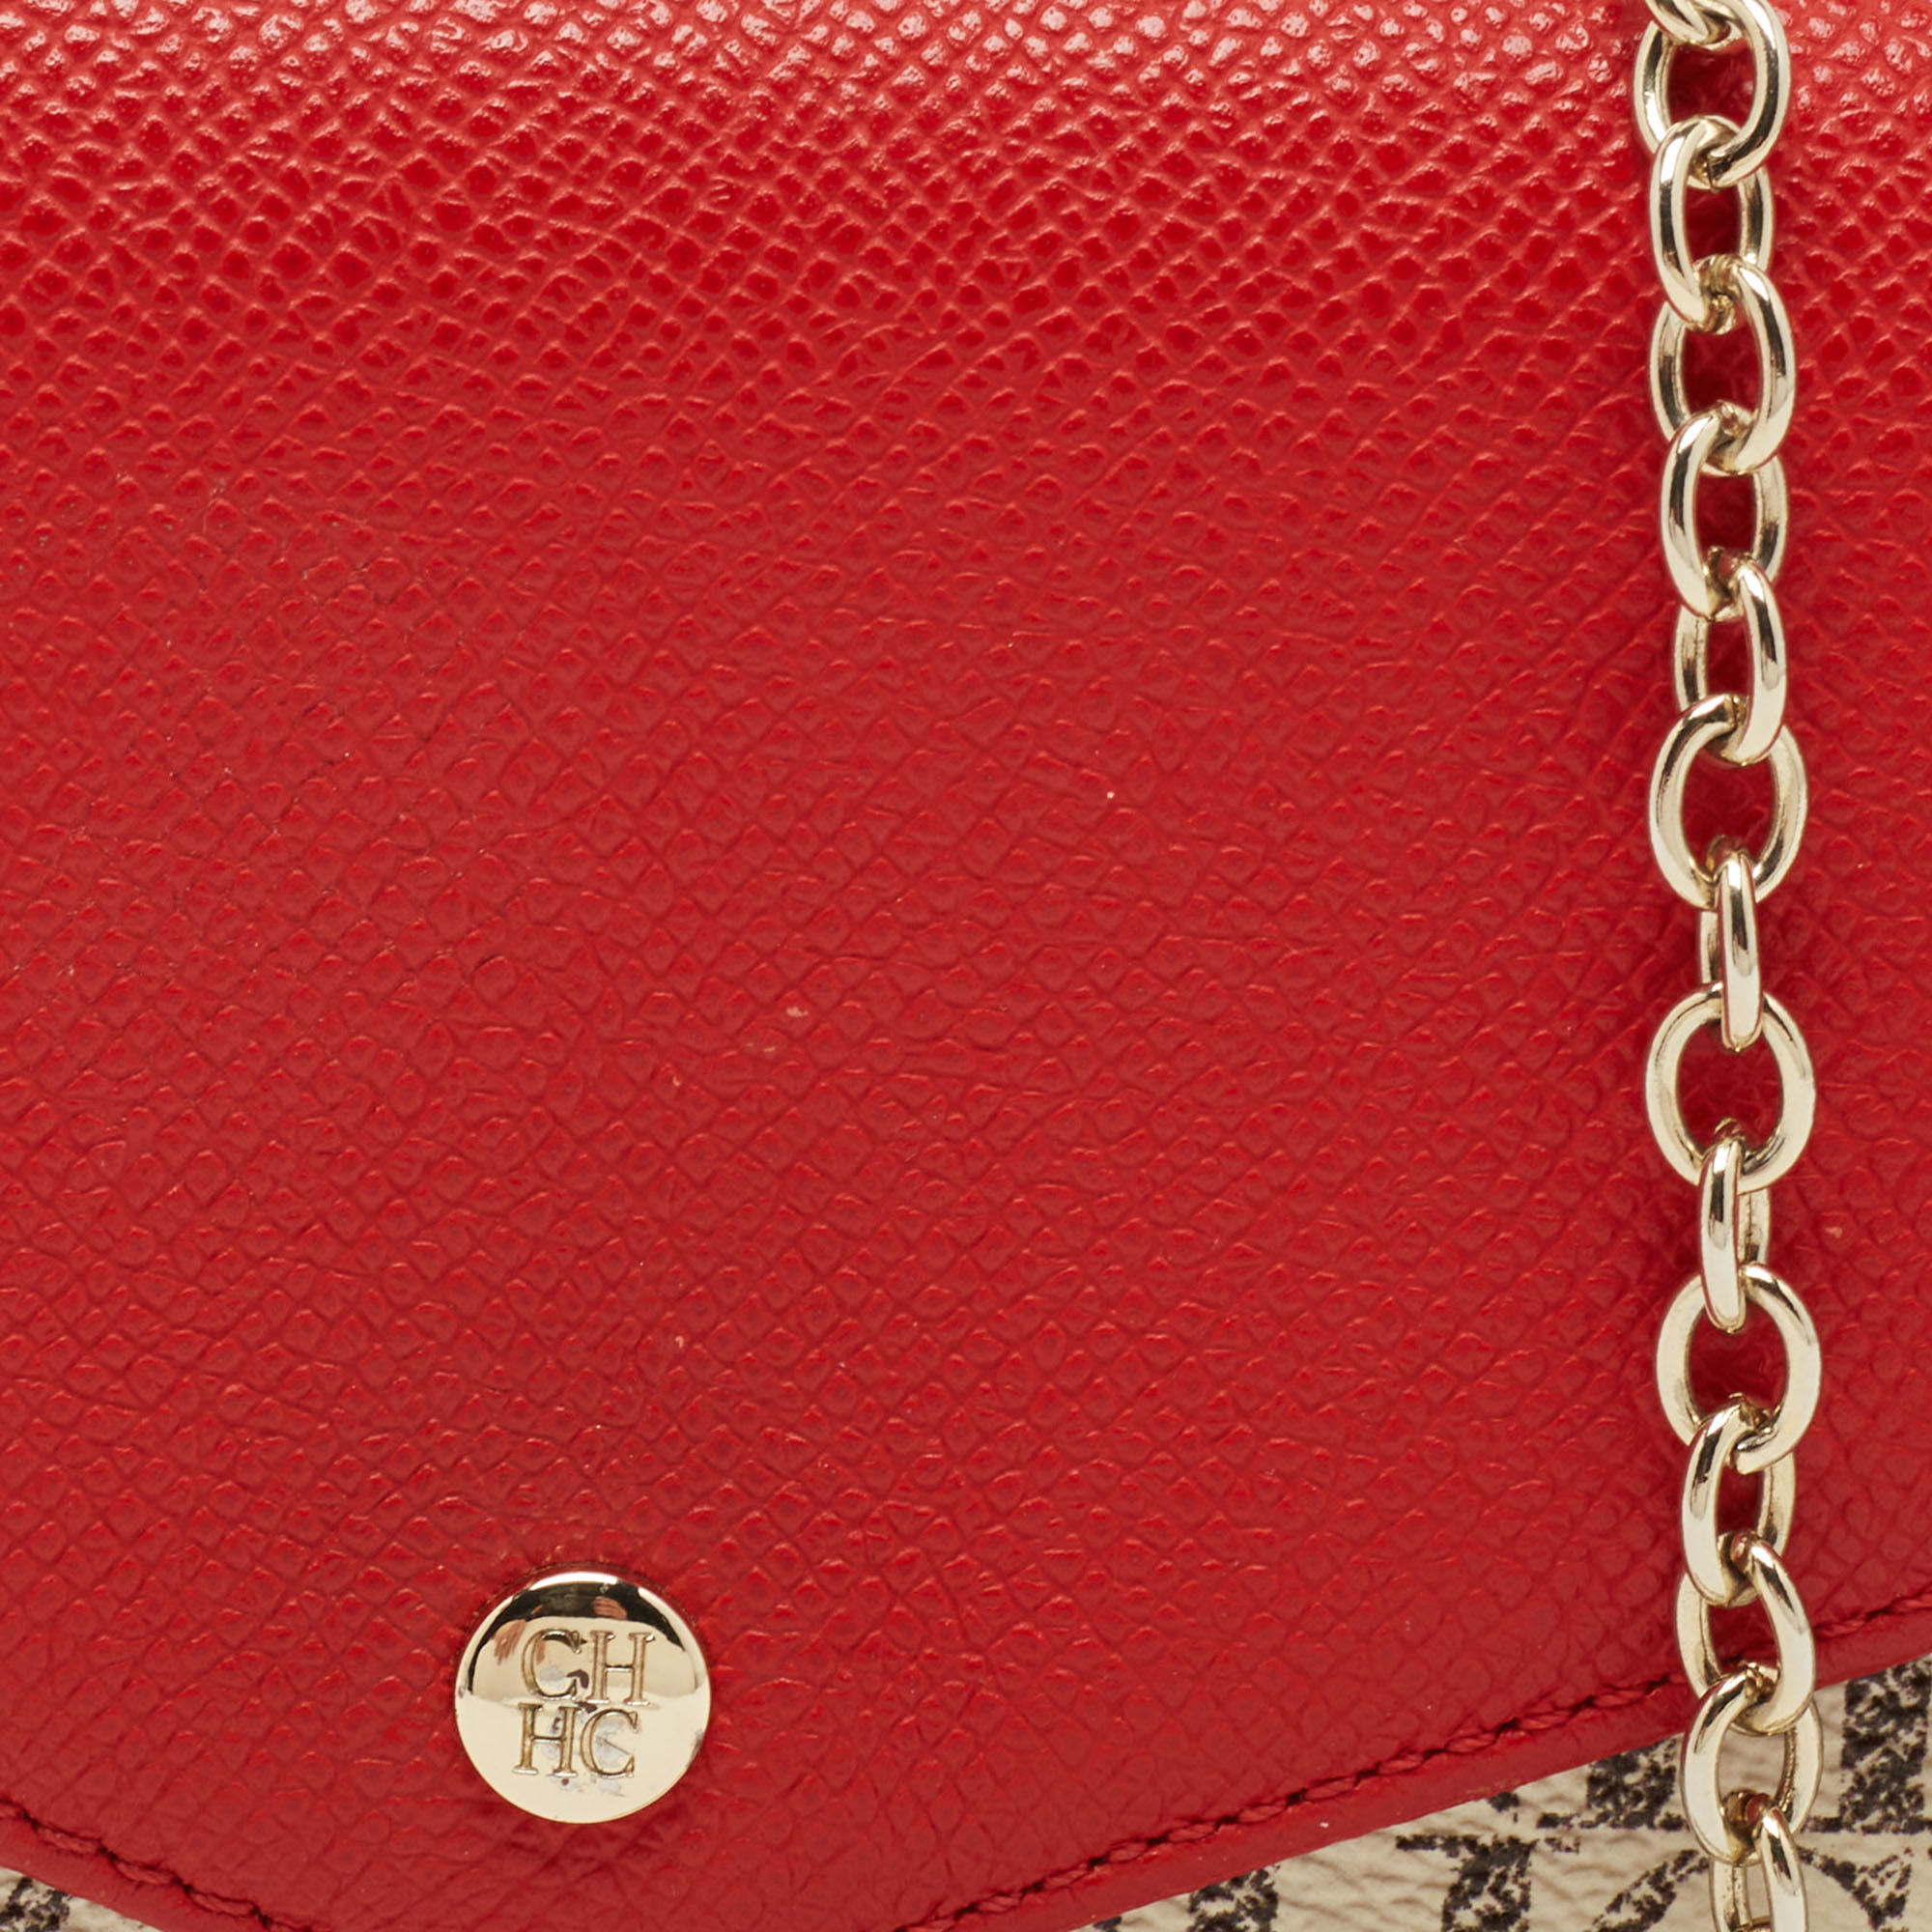 Carolina Herrera Red/White Monogram Coated Canvas And Leather Wallet On Chain